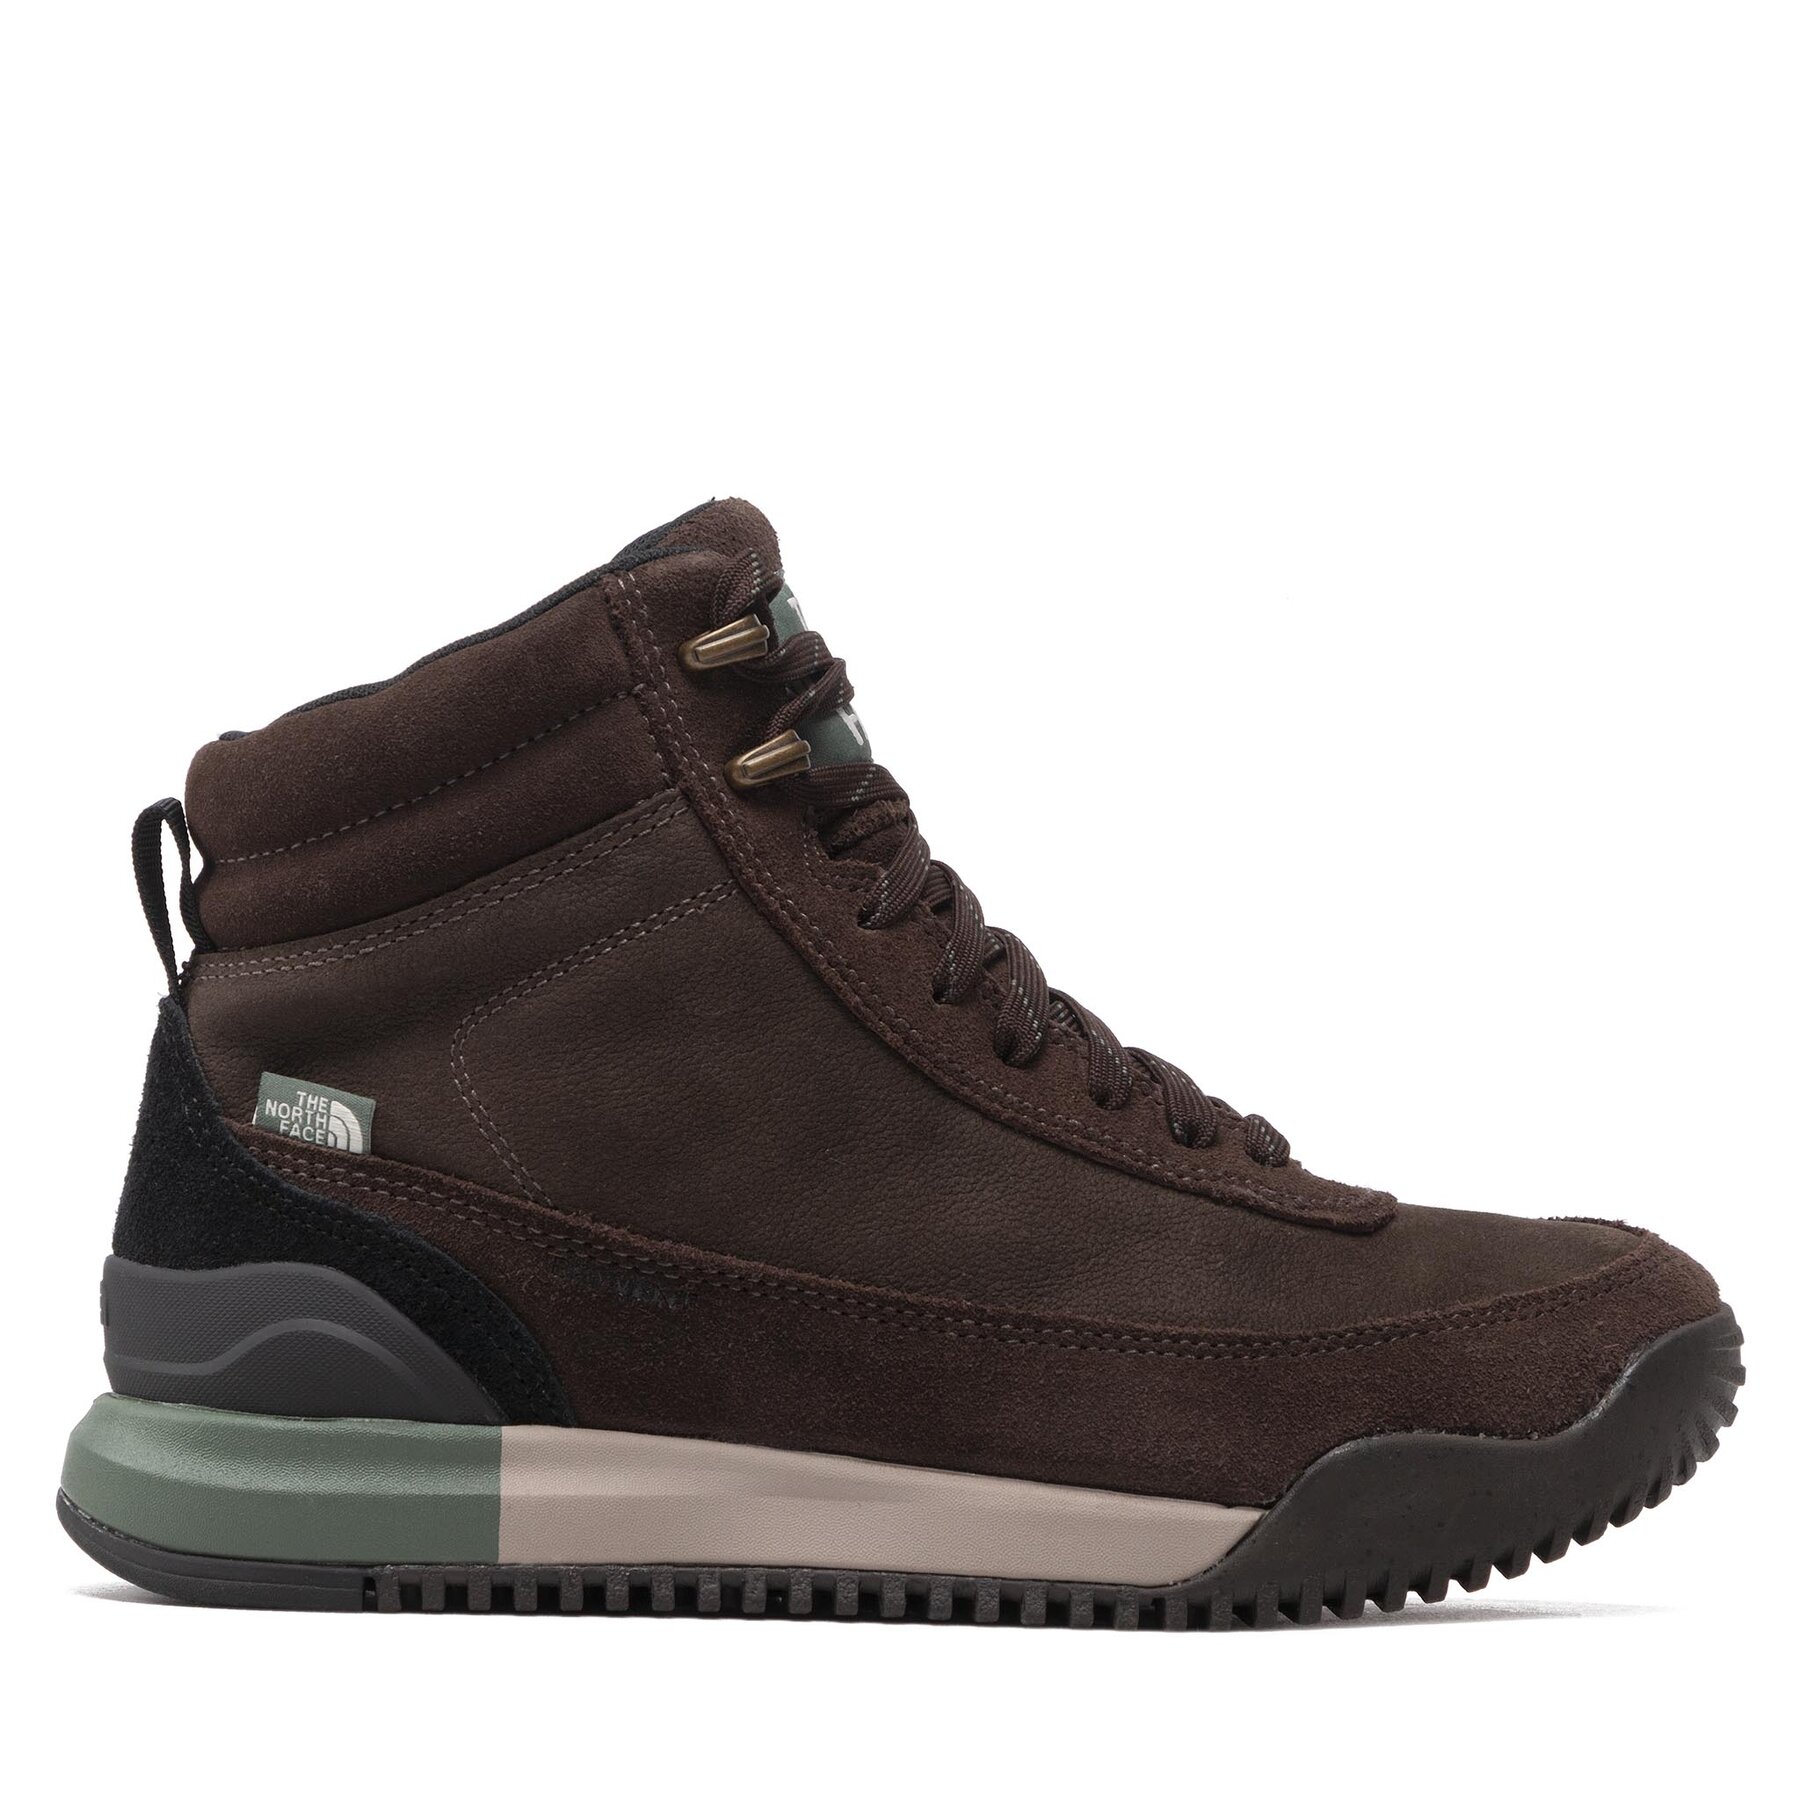 Trekkingschuhe The North Face Back-To-Berkeley III NF0A4T3DU6V1 Coffee Brown/Tnf Black von The North Face